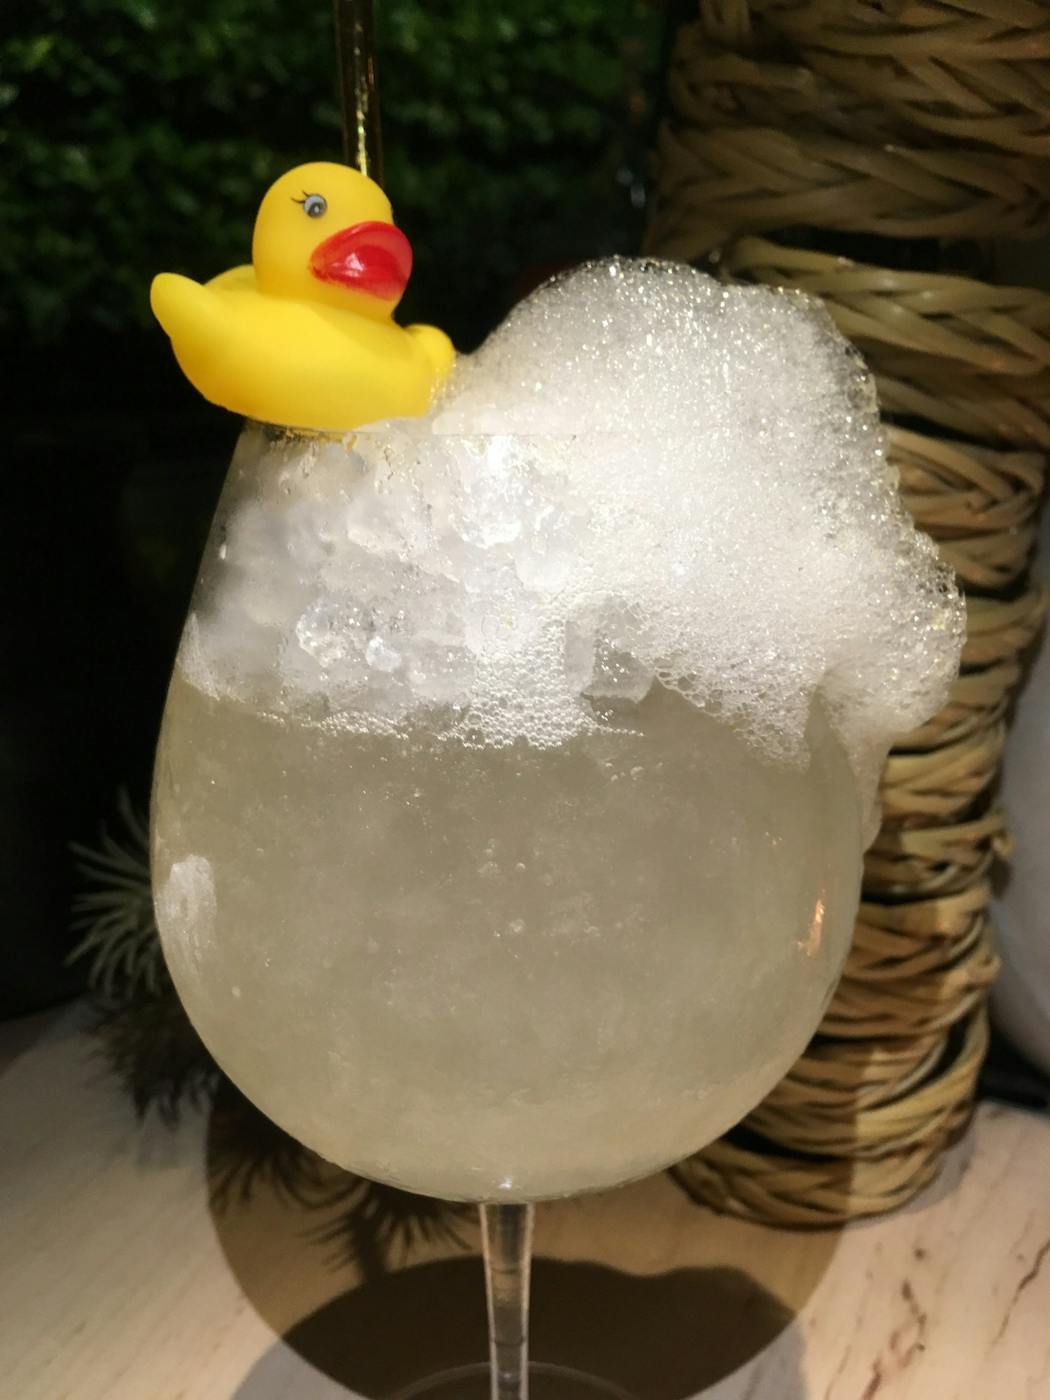 This cocktail comes with a rubber ducky.